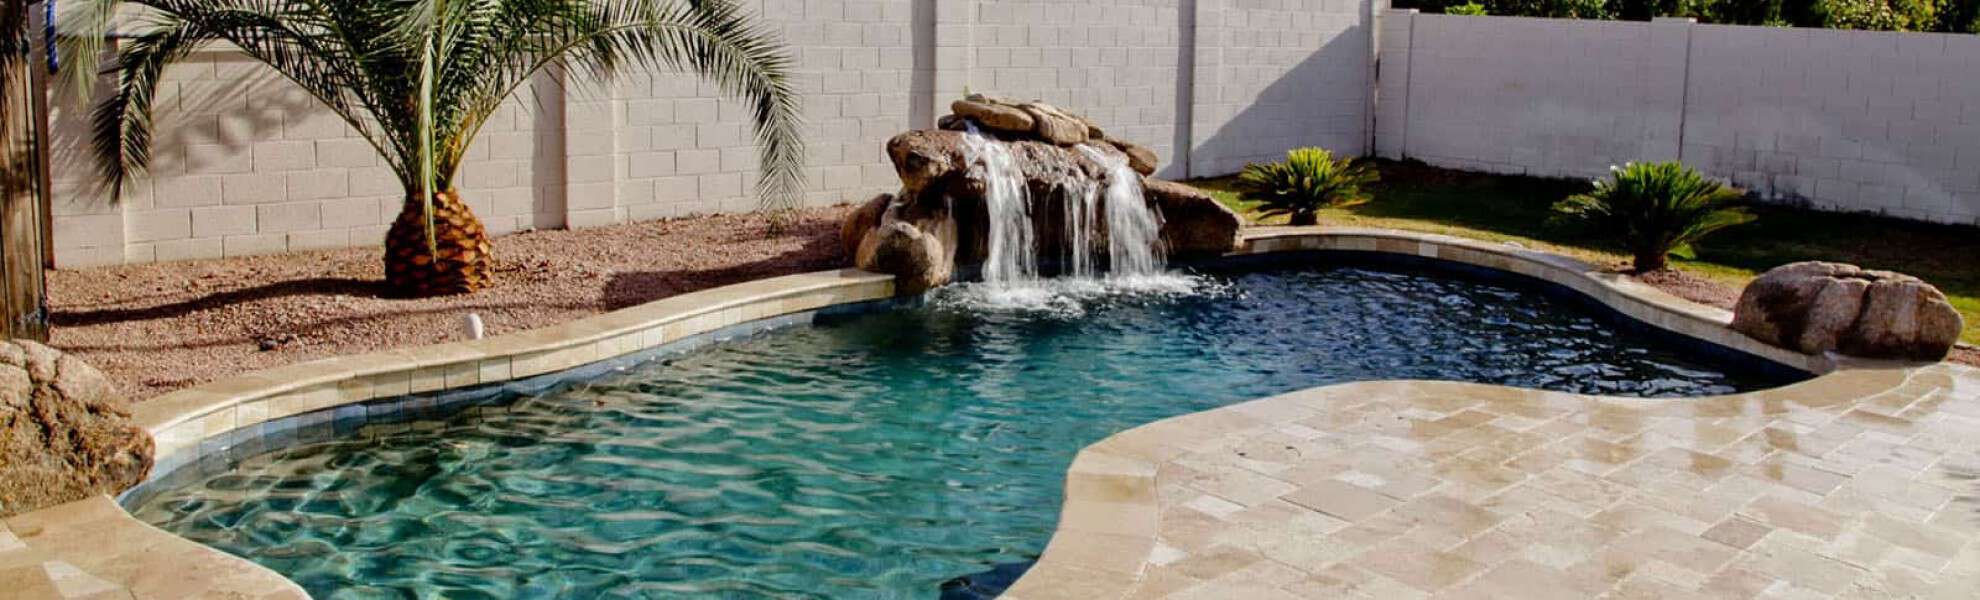 ASP Swimming Pool Remodel | After Photo | Shasta Pools & Spas